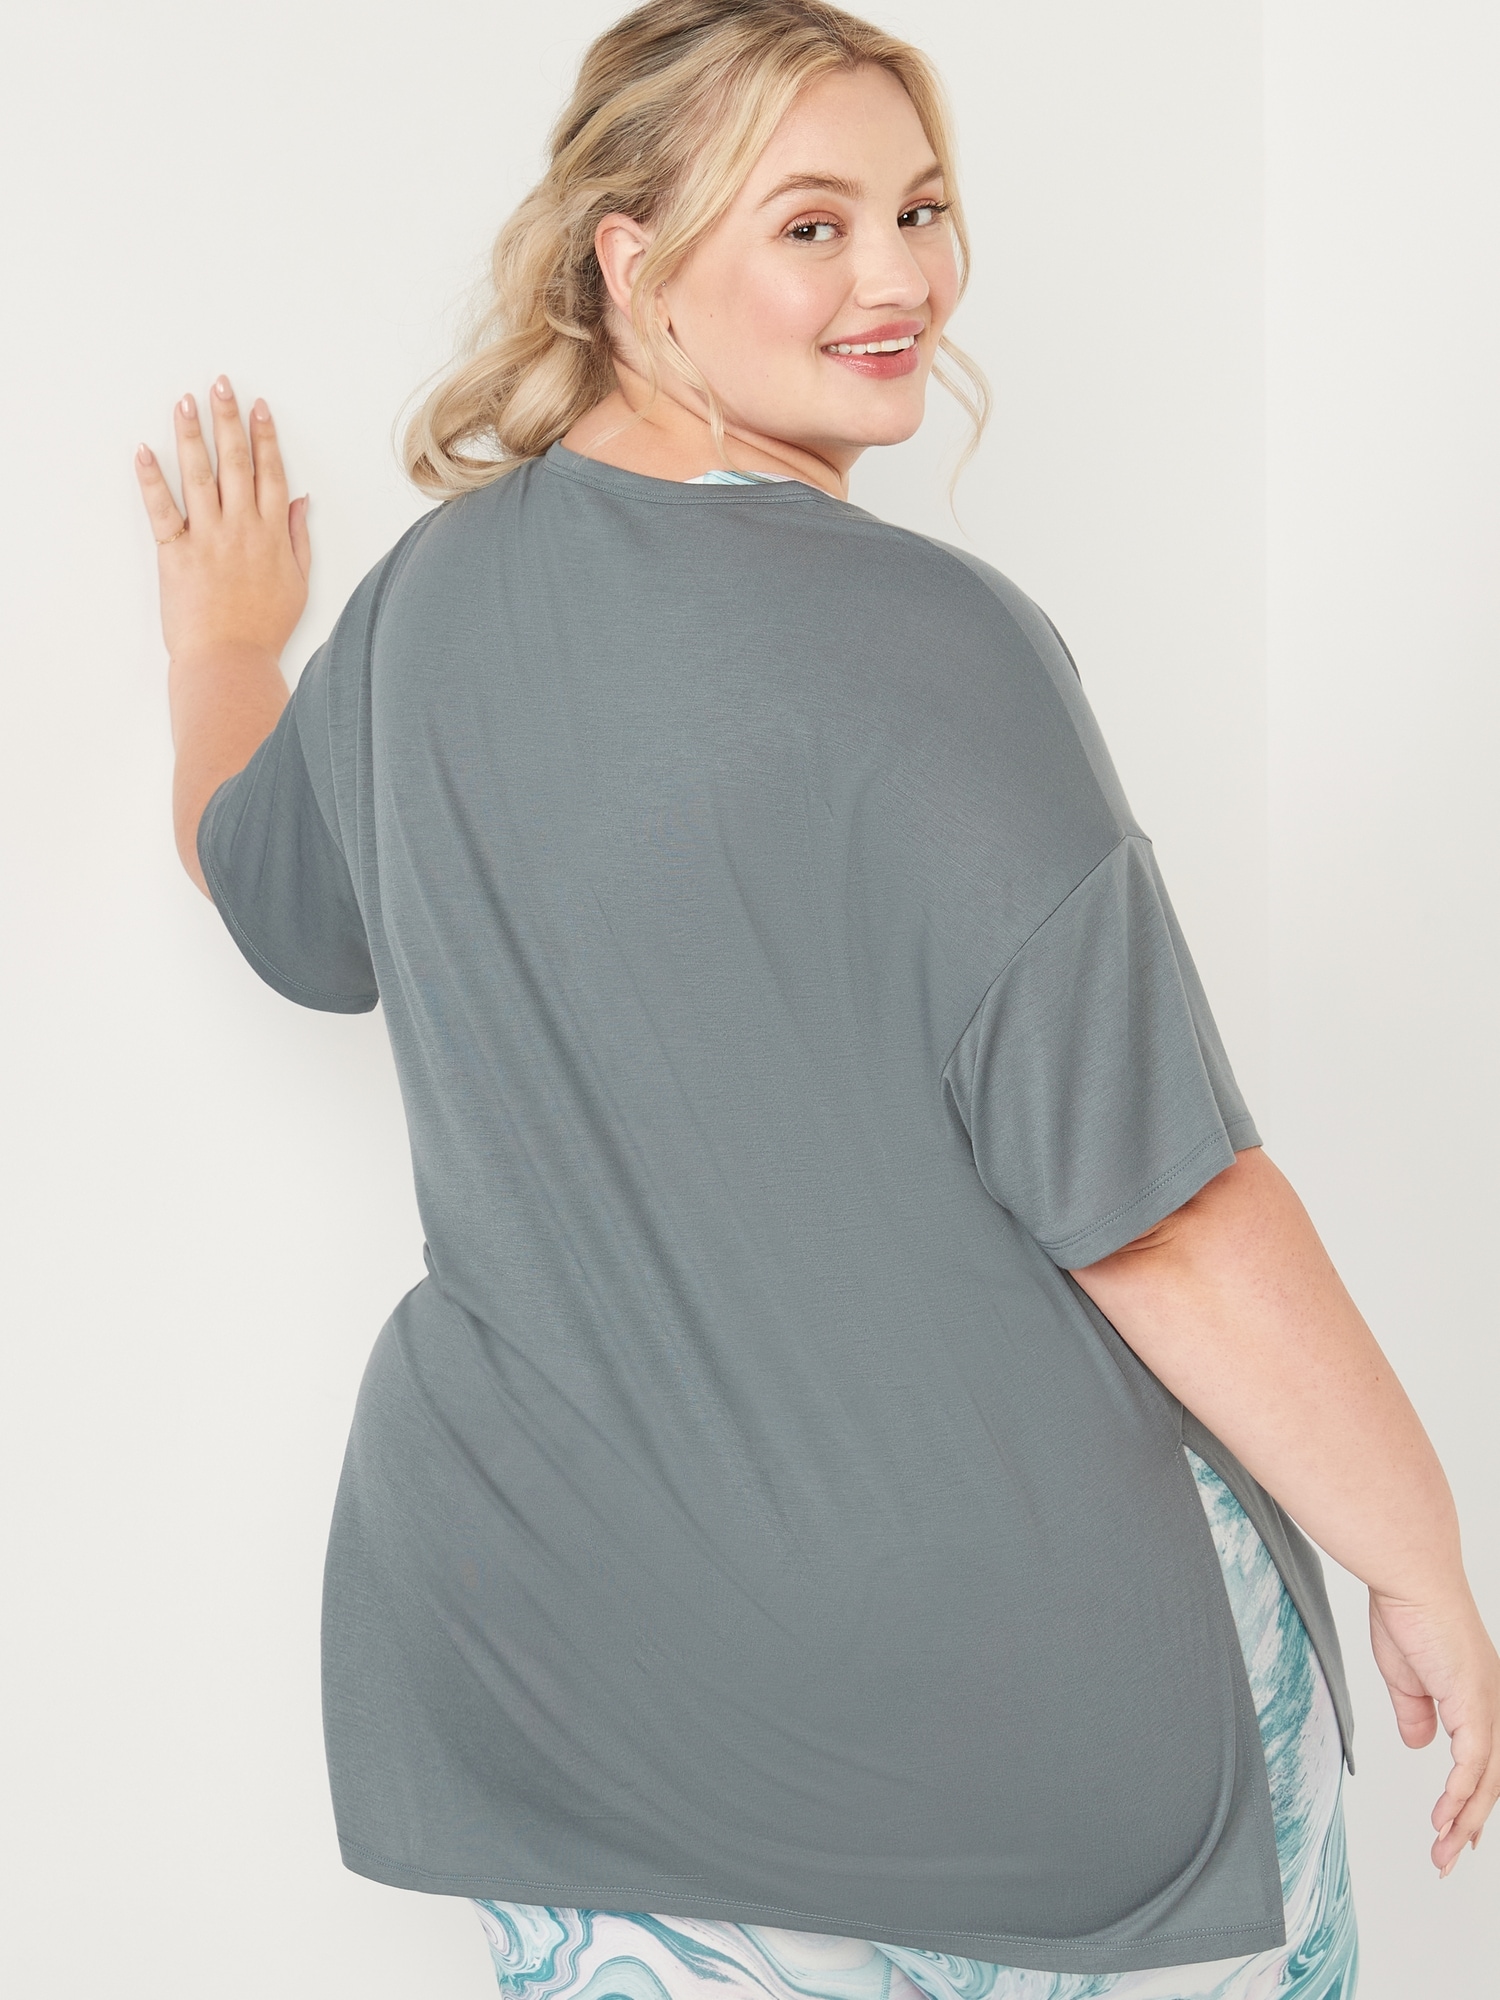 Oversized UltraLite All-Day Tunic for Women | Old Navy